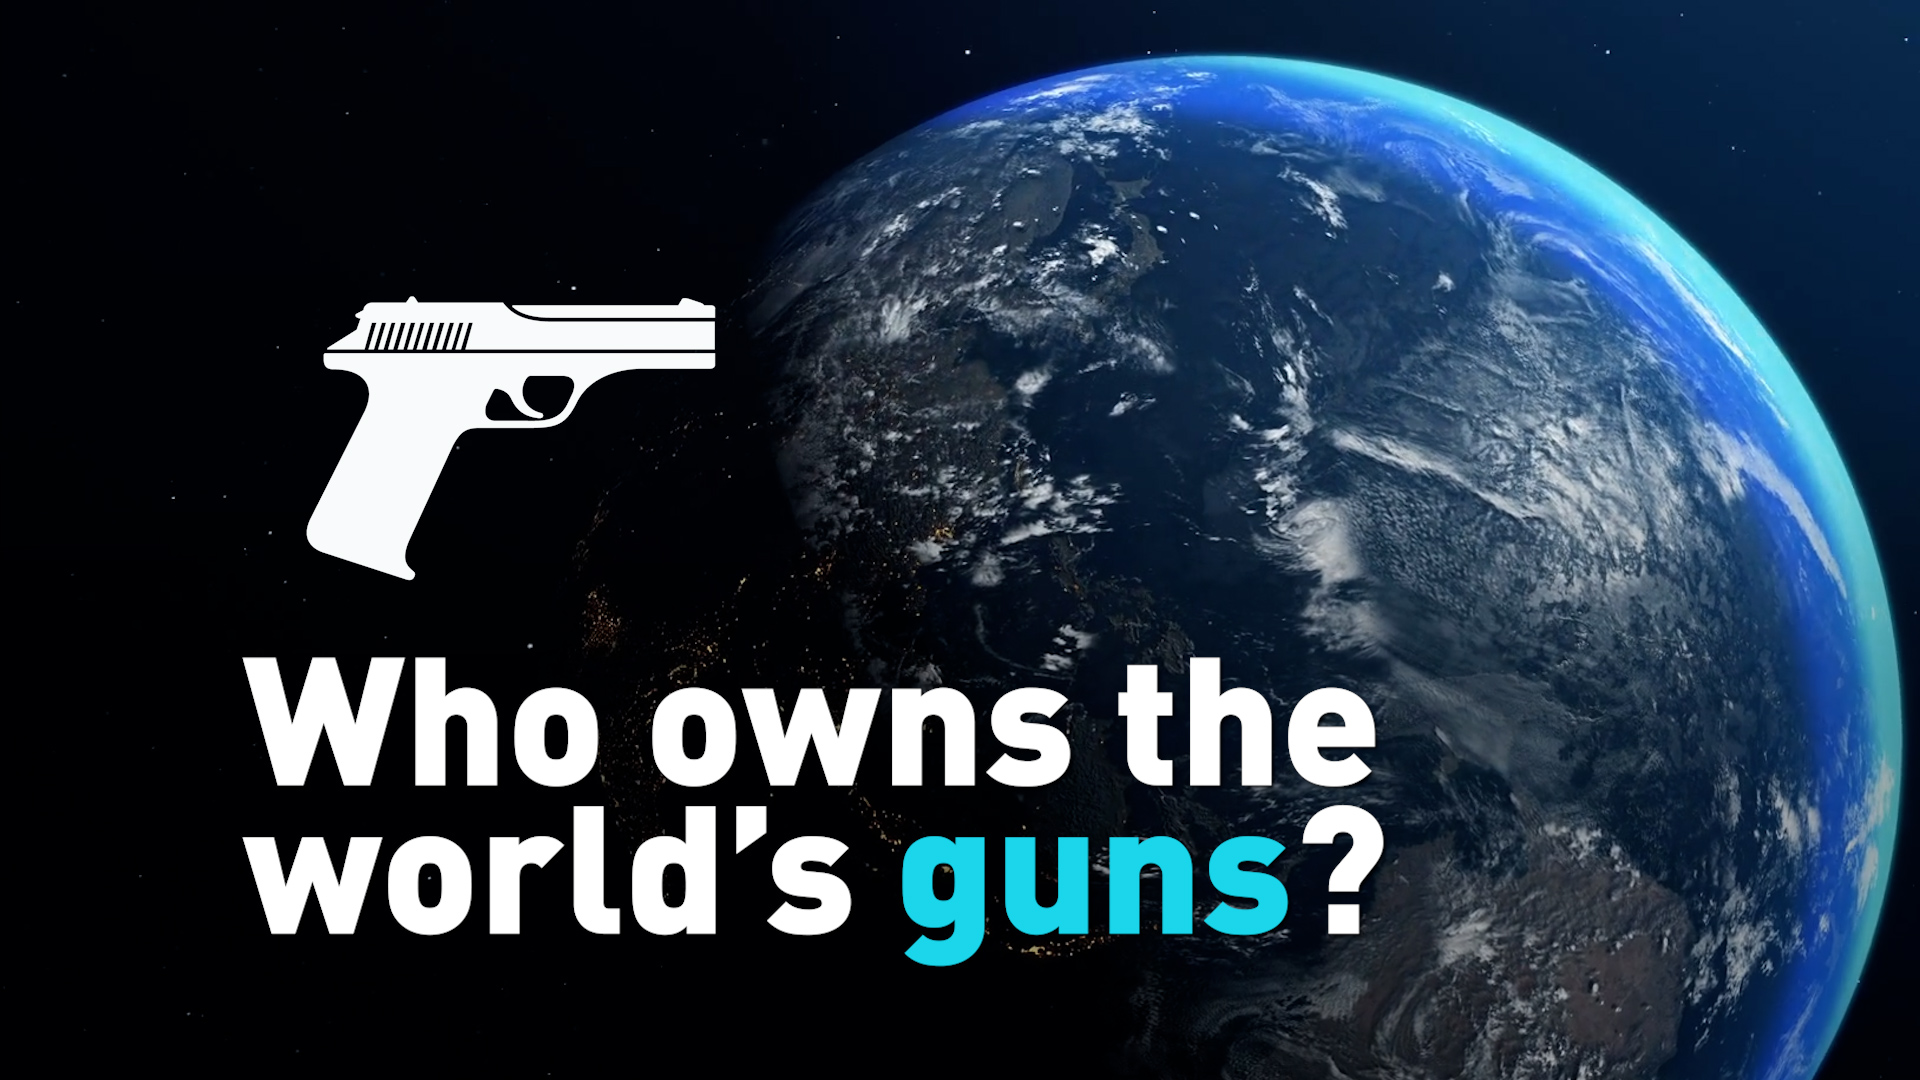 Who owns the world’s guns? Spoiler: it’s no surprise